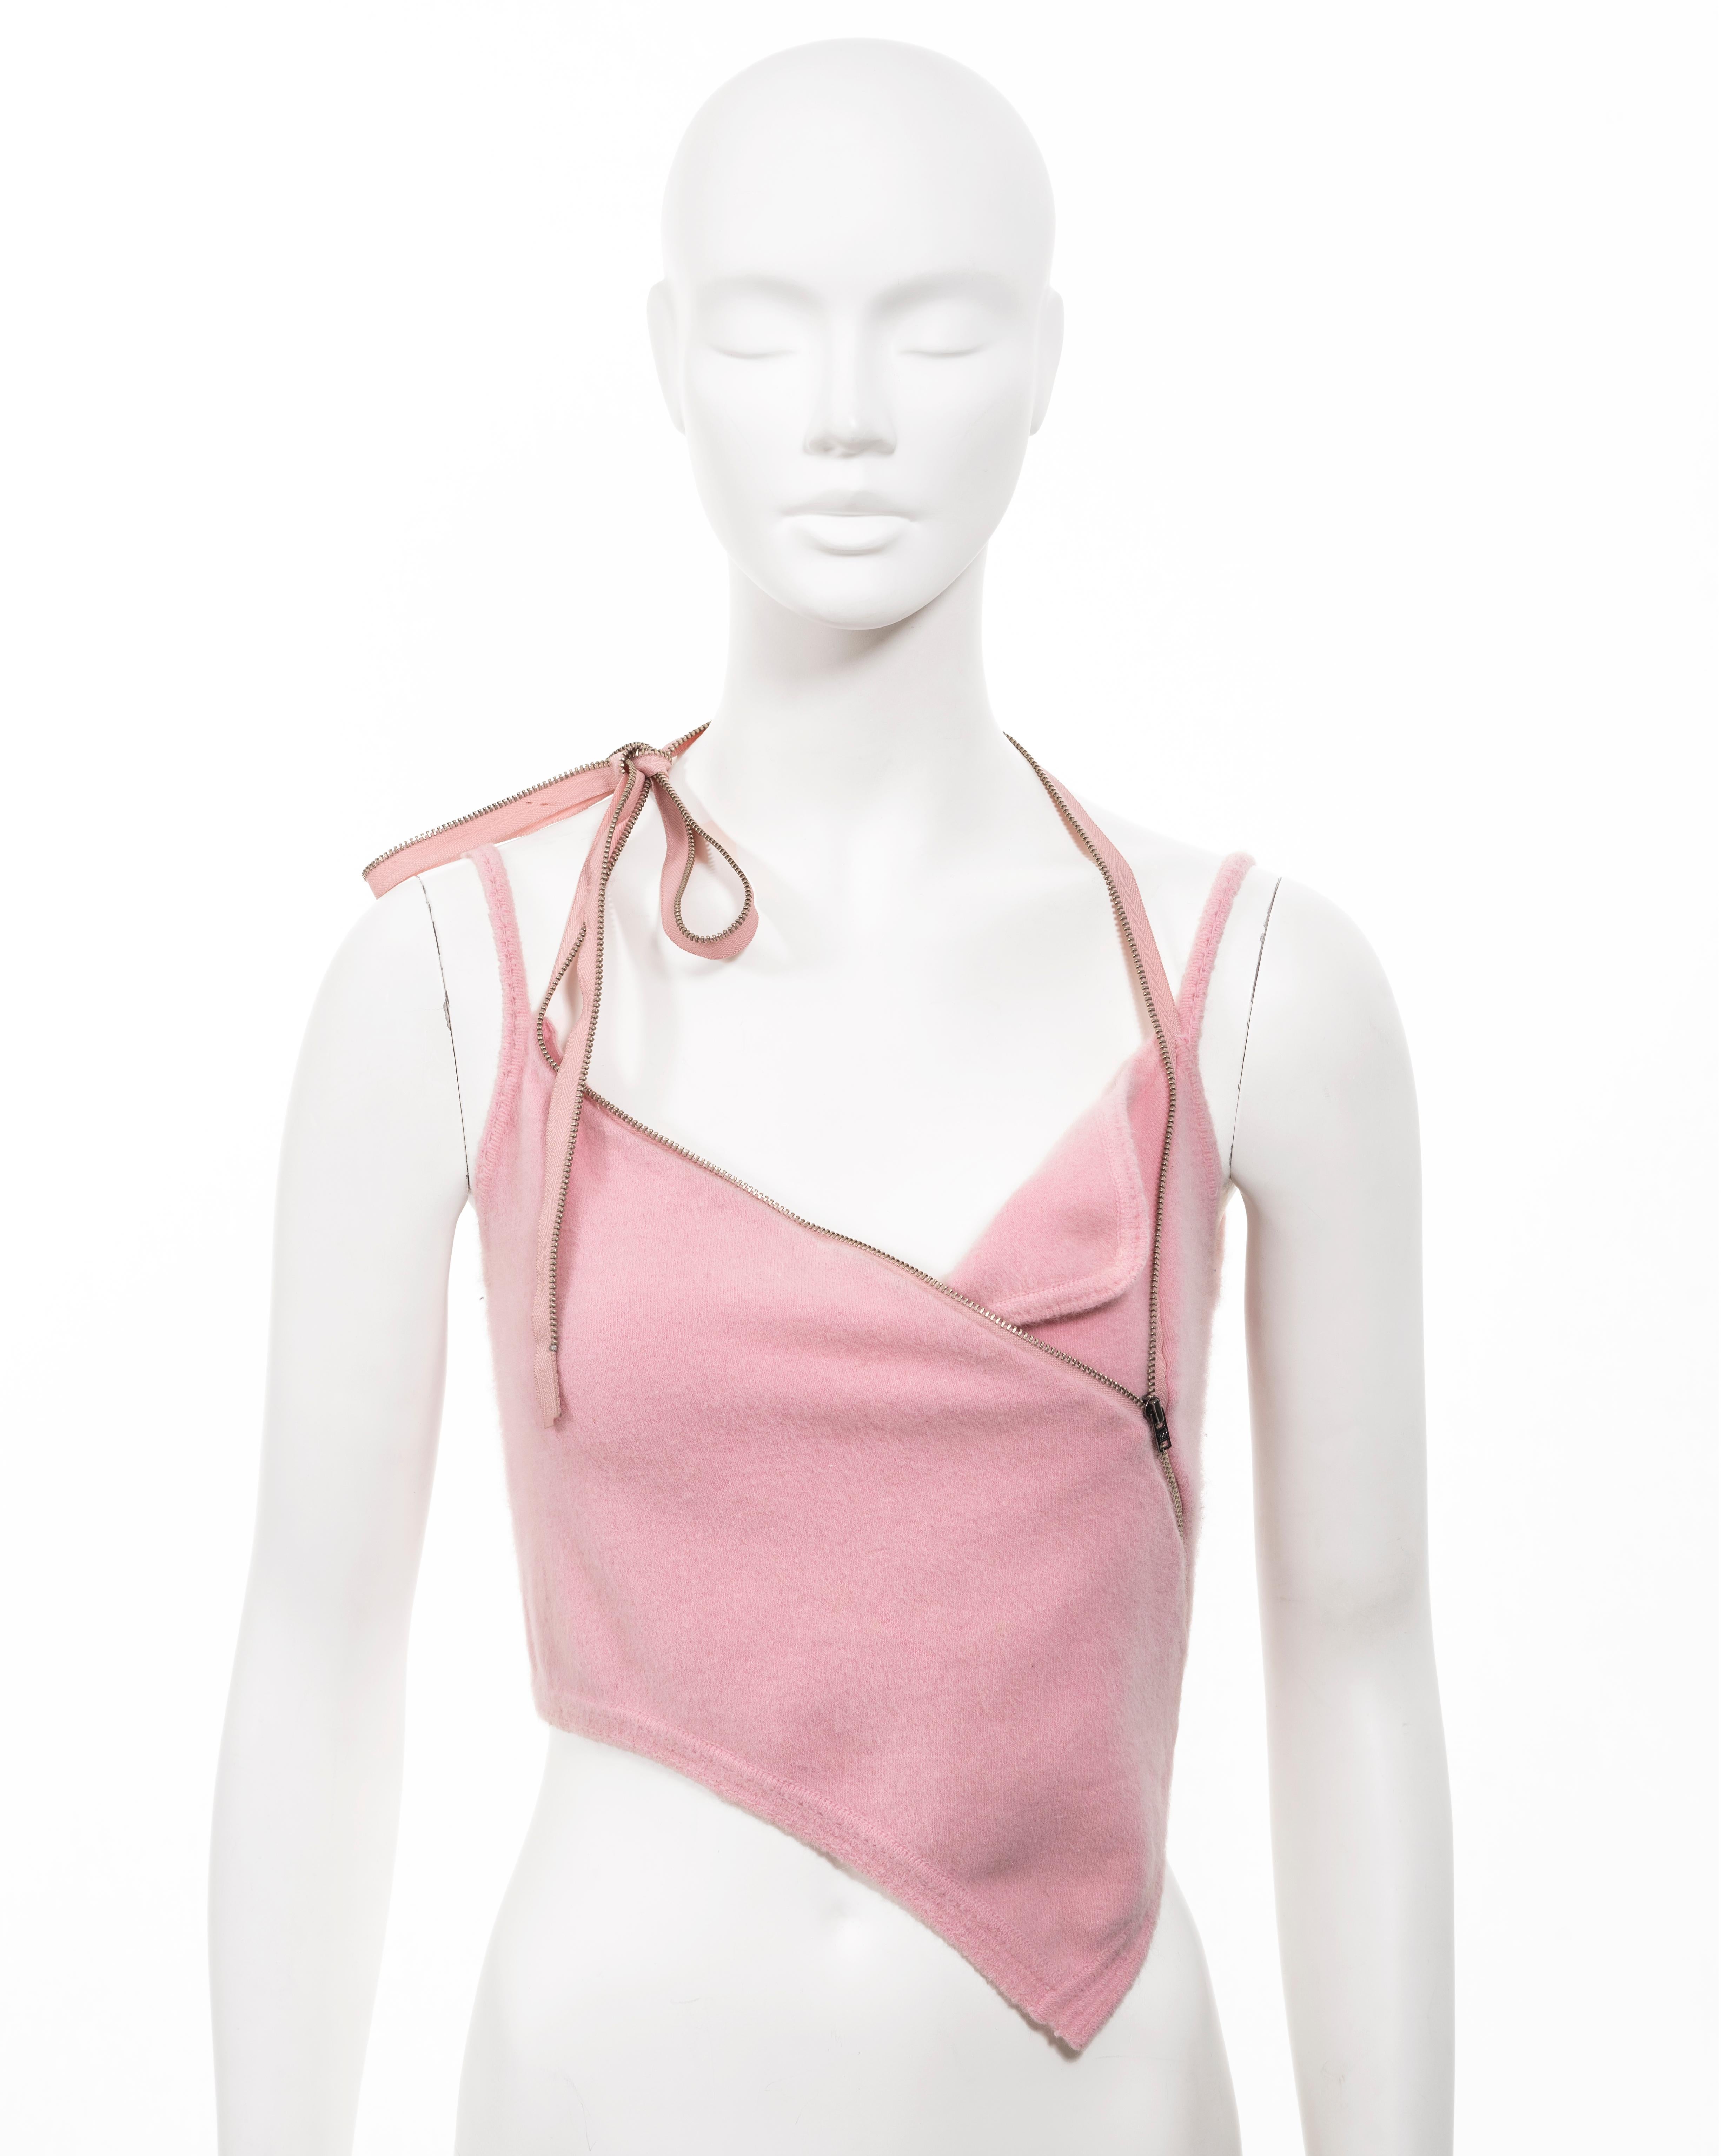 ▪ John Galliano crop top
▪ Sold by One of a Kind Archive
▪ Spring-Summer 2000
▪ Constructed from baby pink fuzzy Angora 
▪ Asymmetric cut 
▪ Zip fastening at the chest extending into two halter-neck ties 
▪ Spaghetti straps 
▪ Size 'M' 
▪ Made in